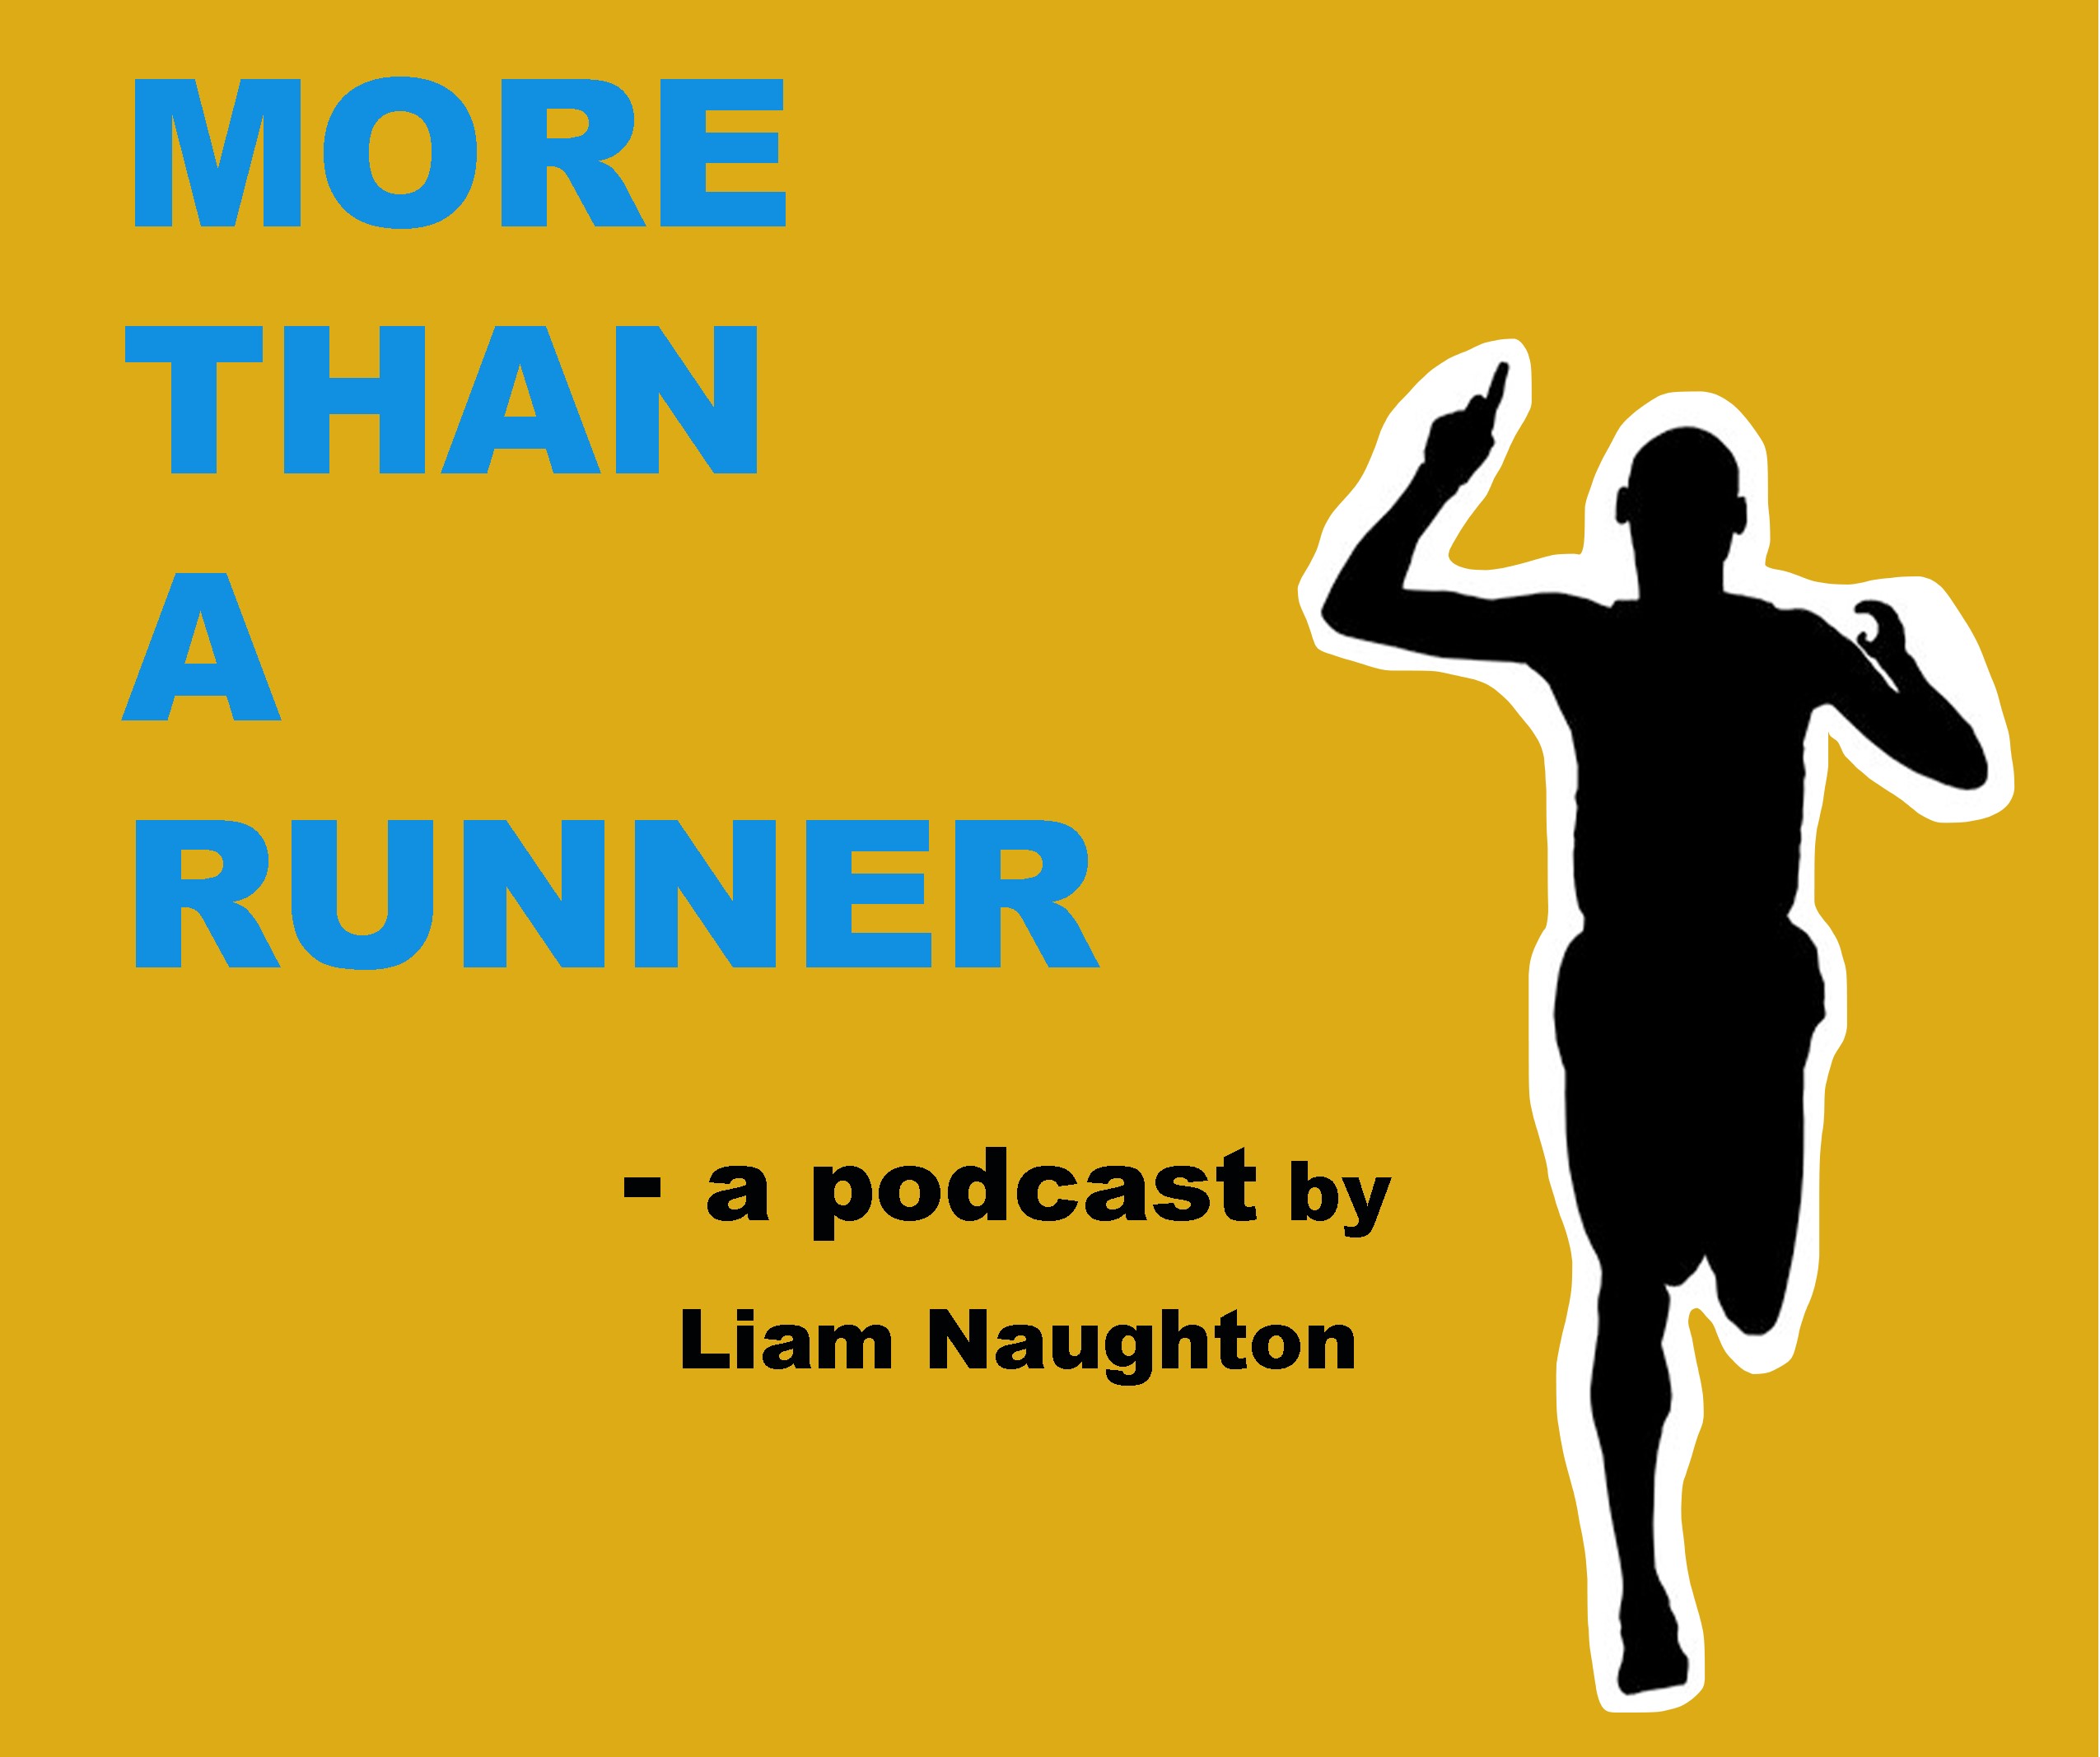 More than a runner podcast